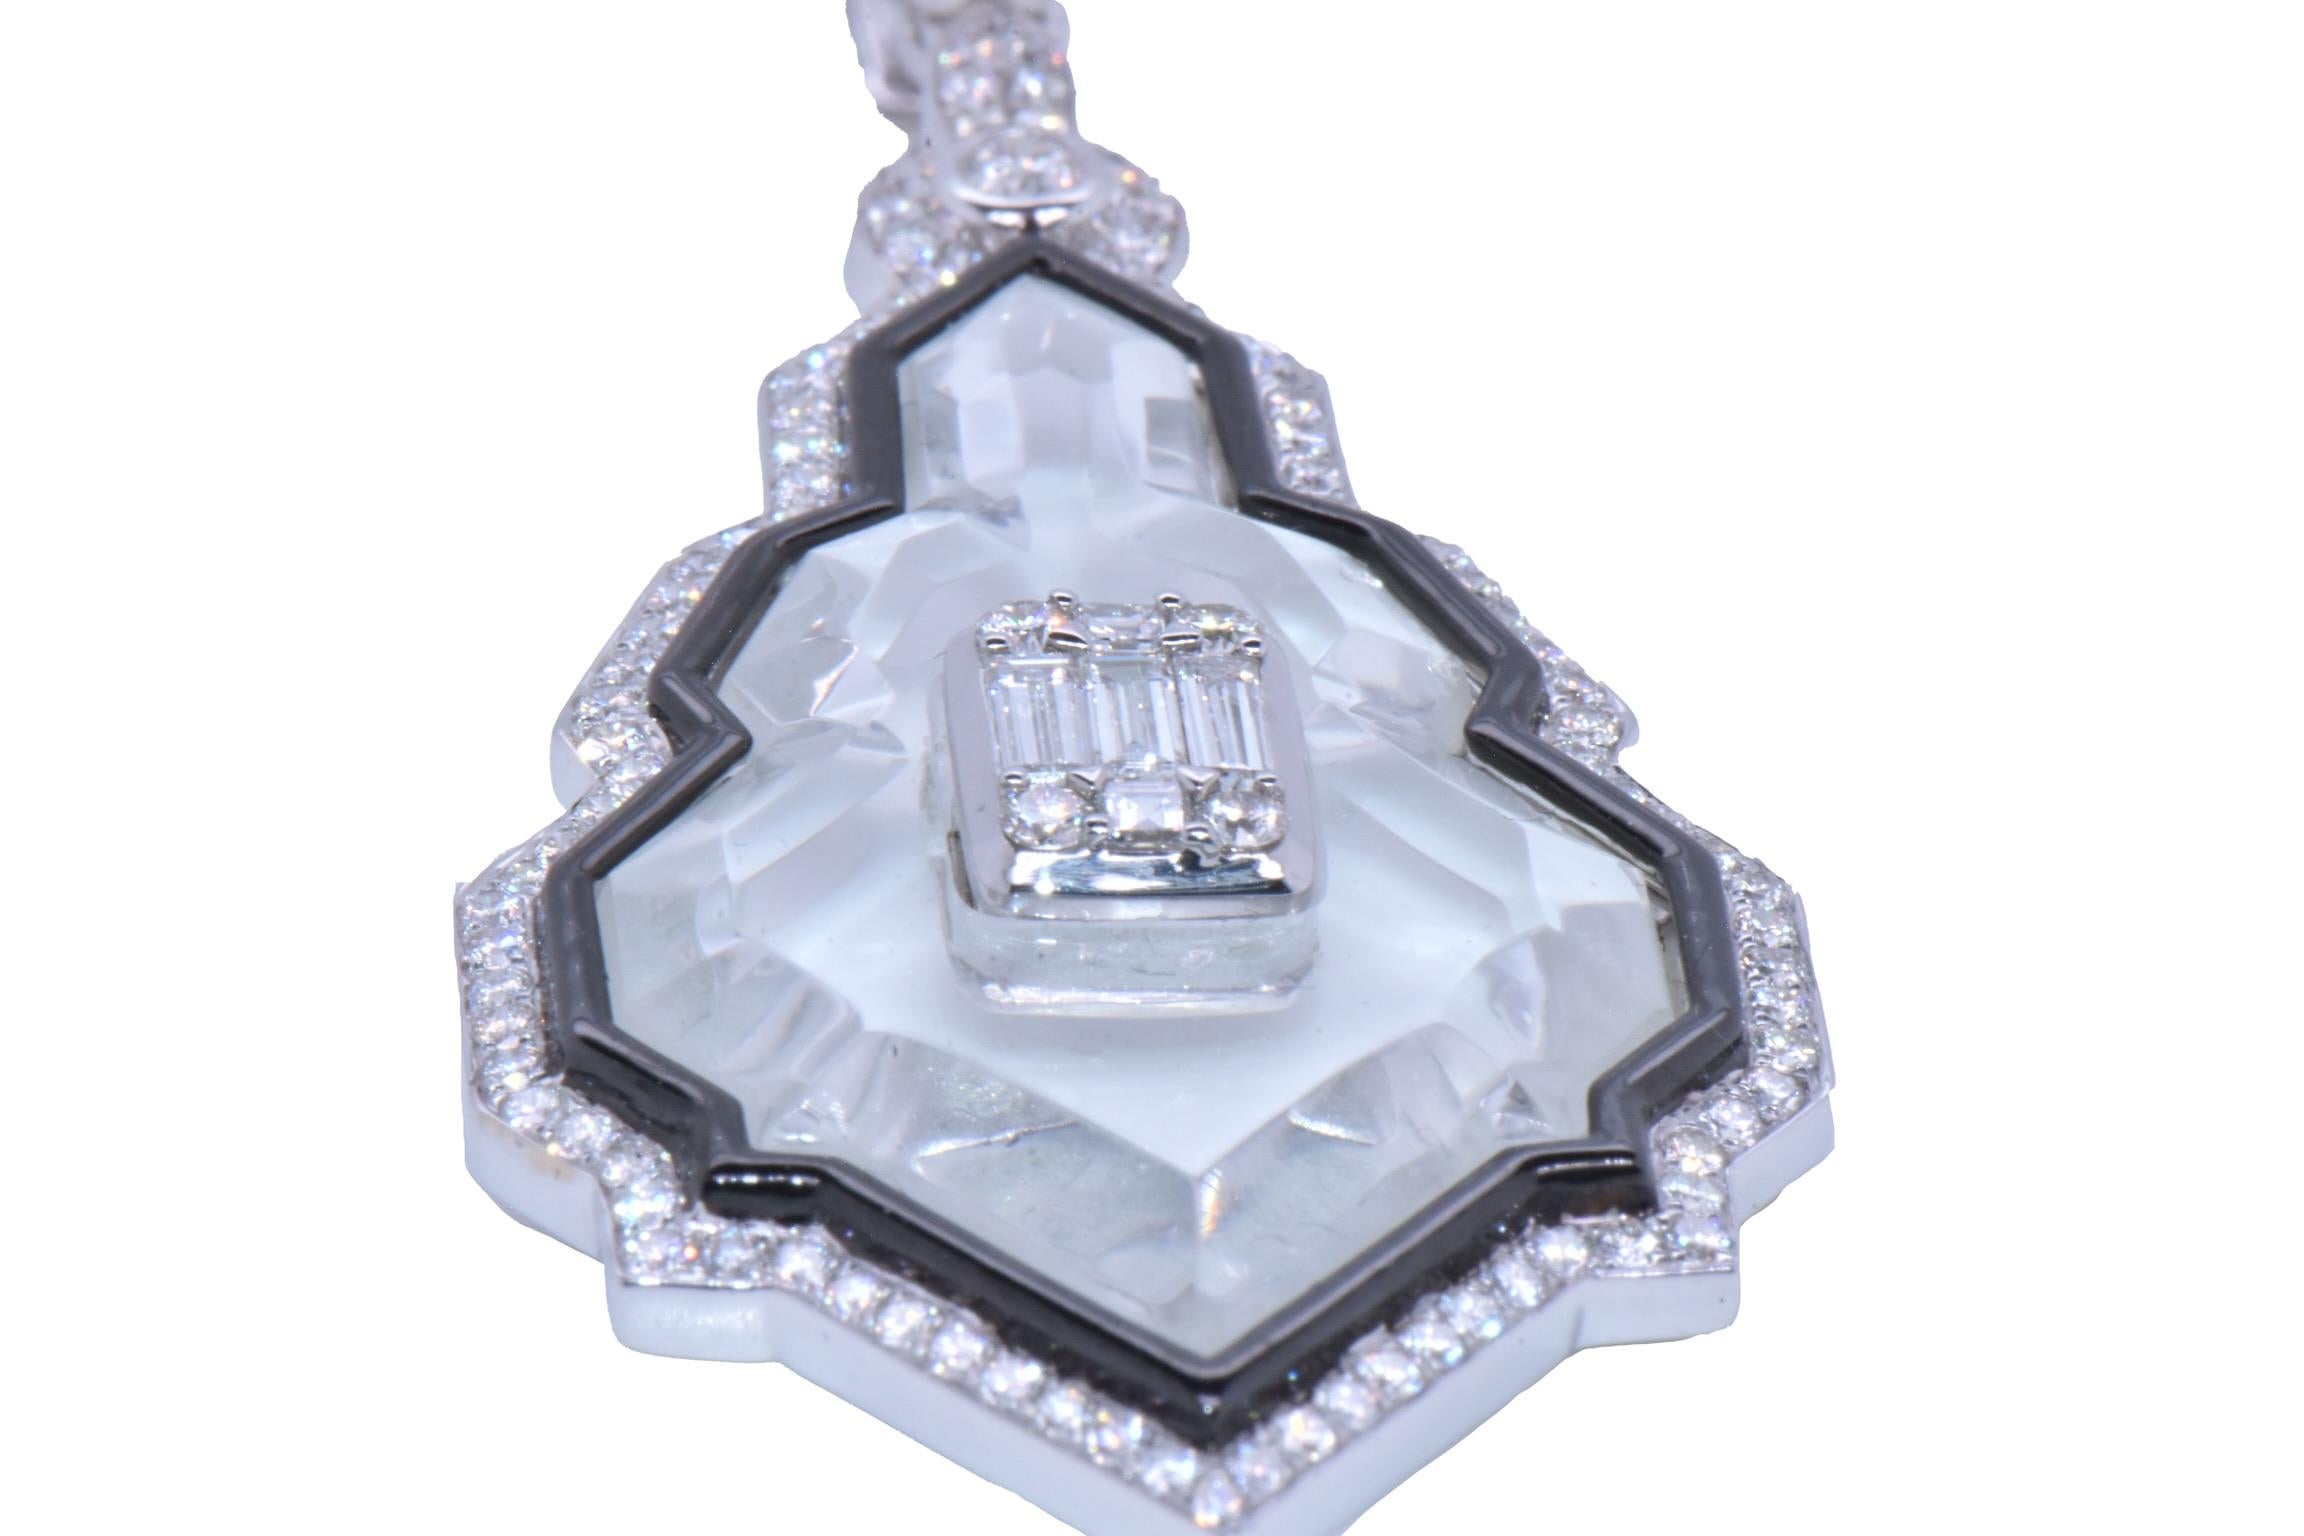 Sunray Crystal Diamond PendantIn 18k White Gold

Beautiful One of a Kind Art-Deco Style Pendant, with Diamond border and a Baguette Diamond Center Setting on top of a Sunray Crystal 

Total Crystal Carat Weight: 2.73 Carats (total one stone)
Round